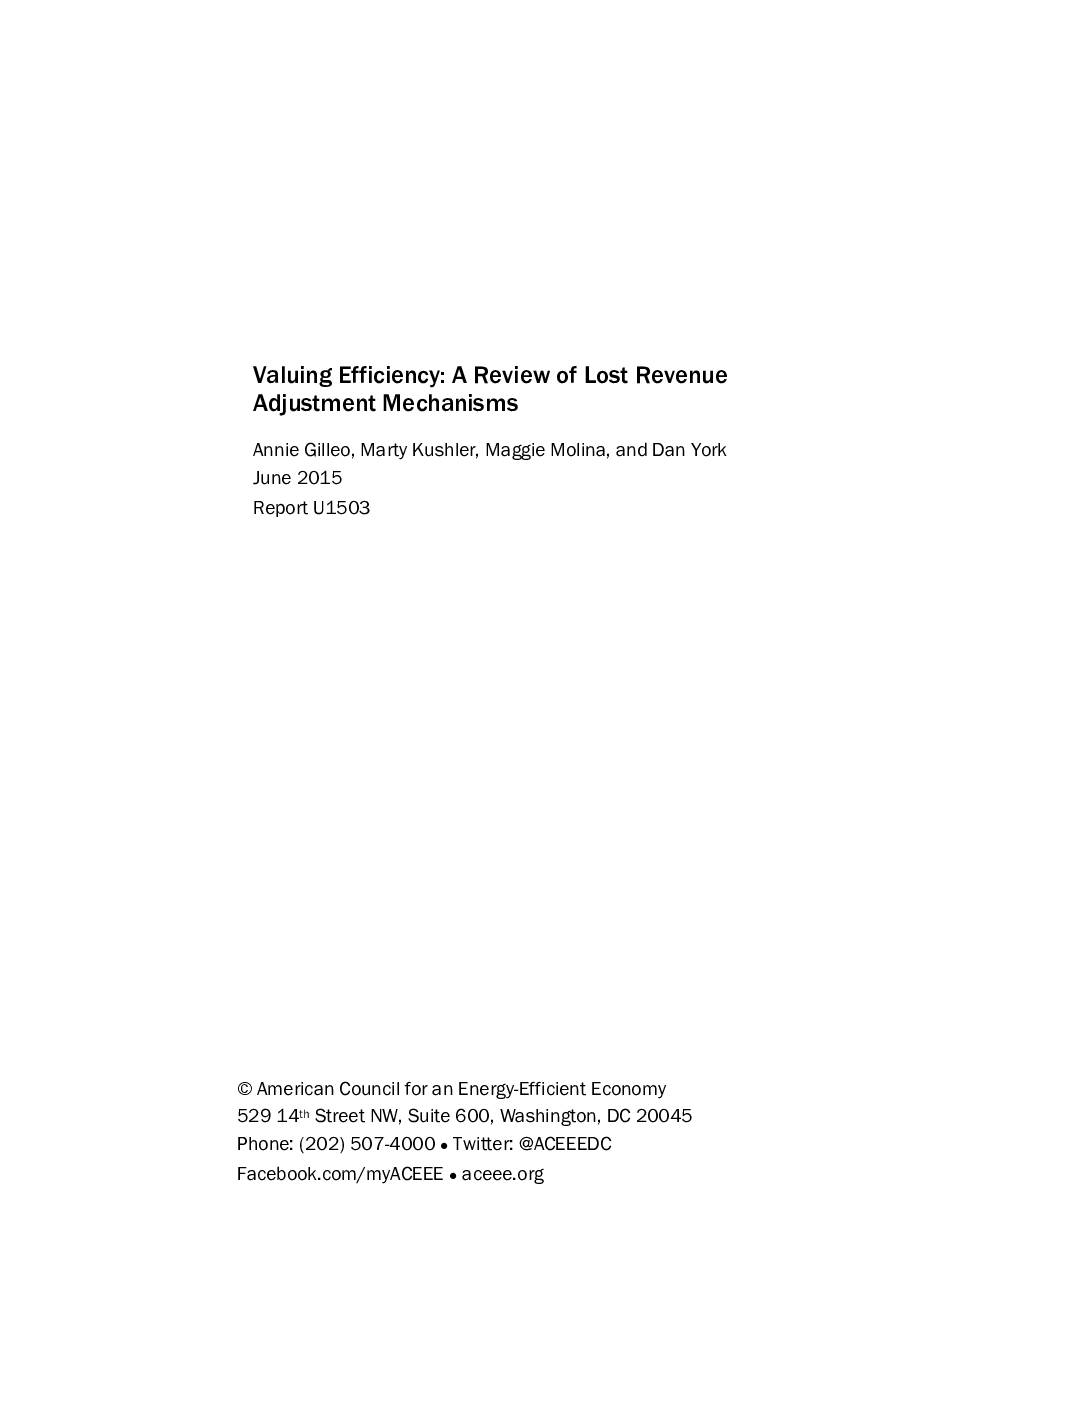 Valuing Efficiency: A Review of Lost Revenue Adjustment Mechanisms